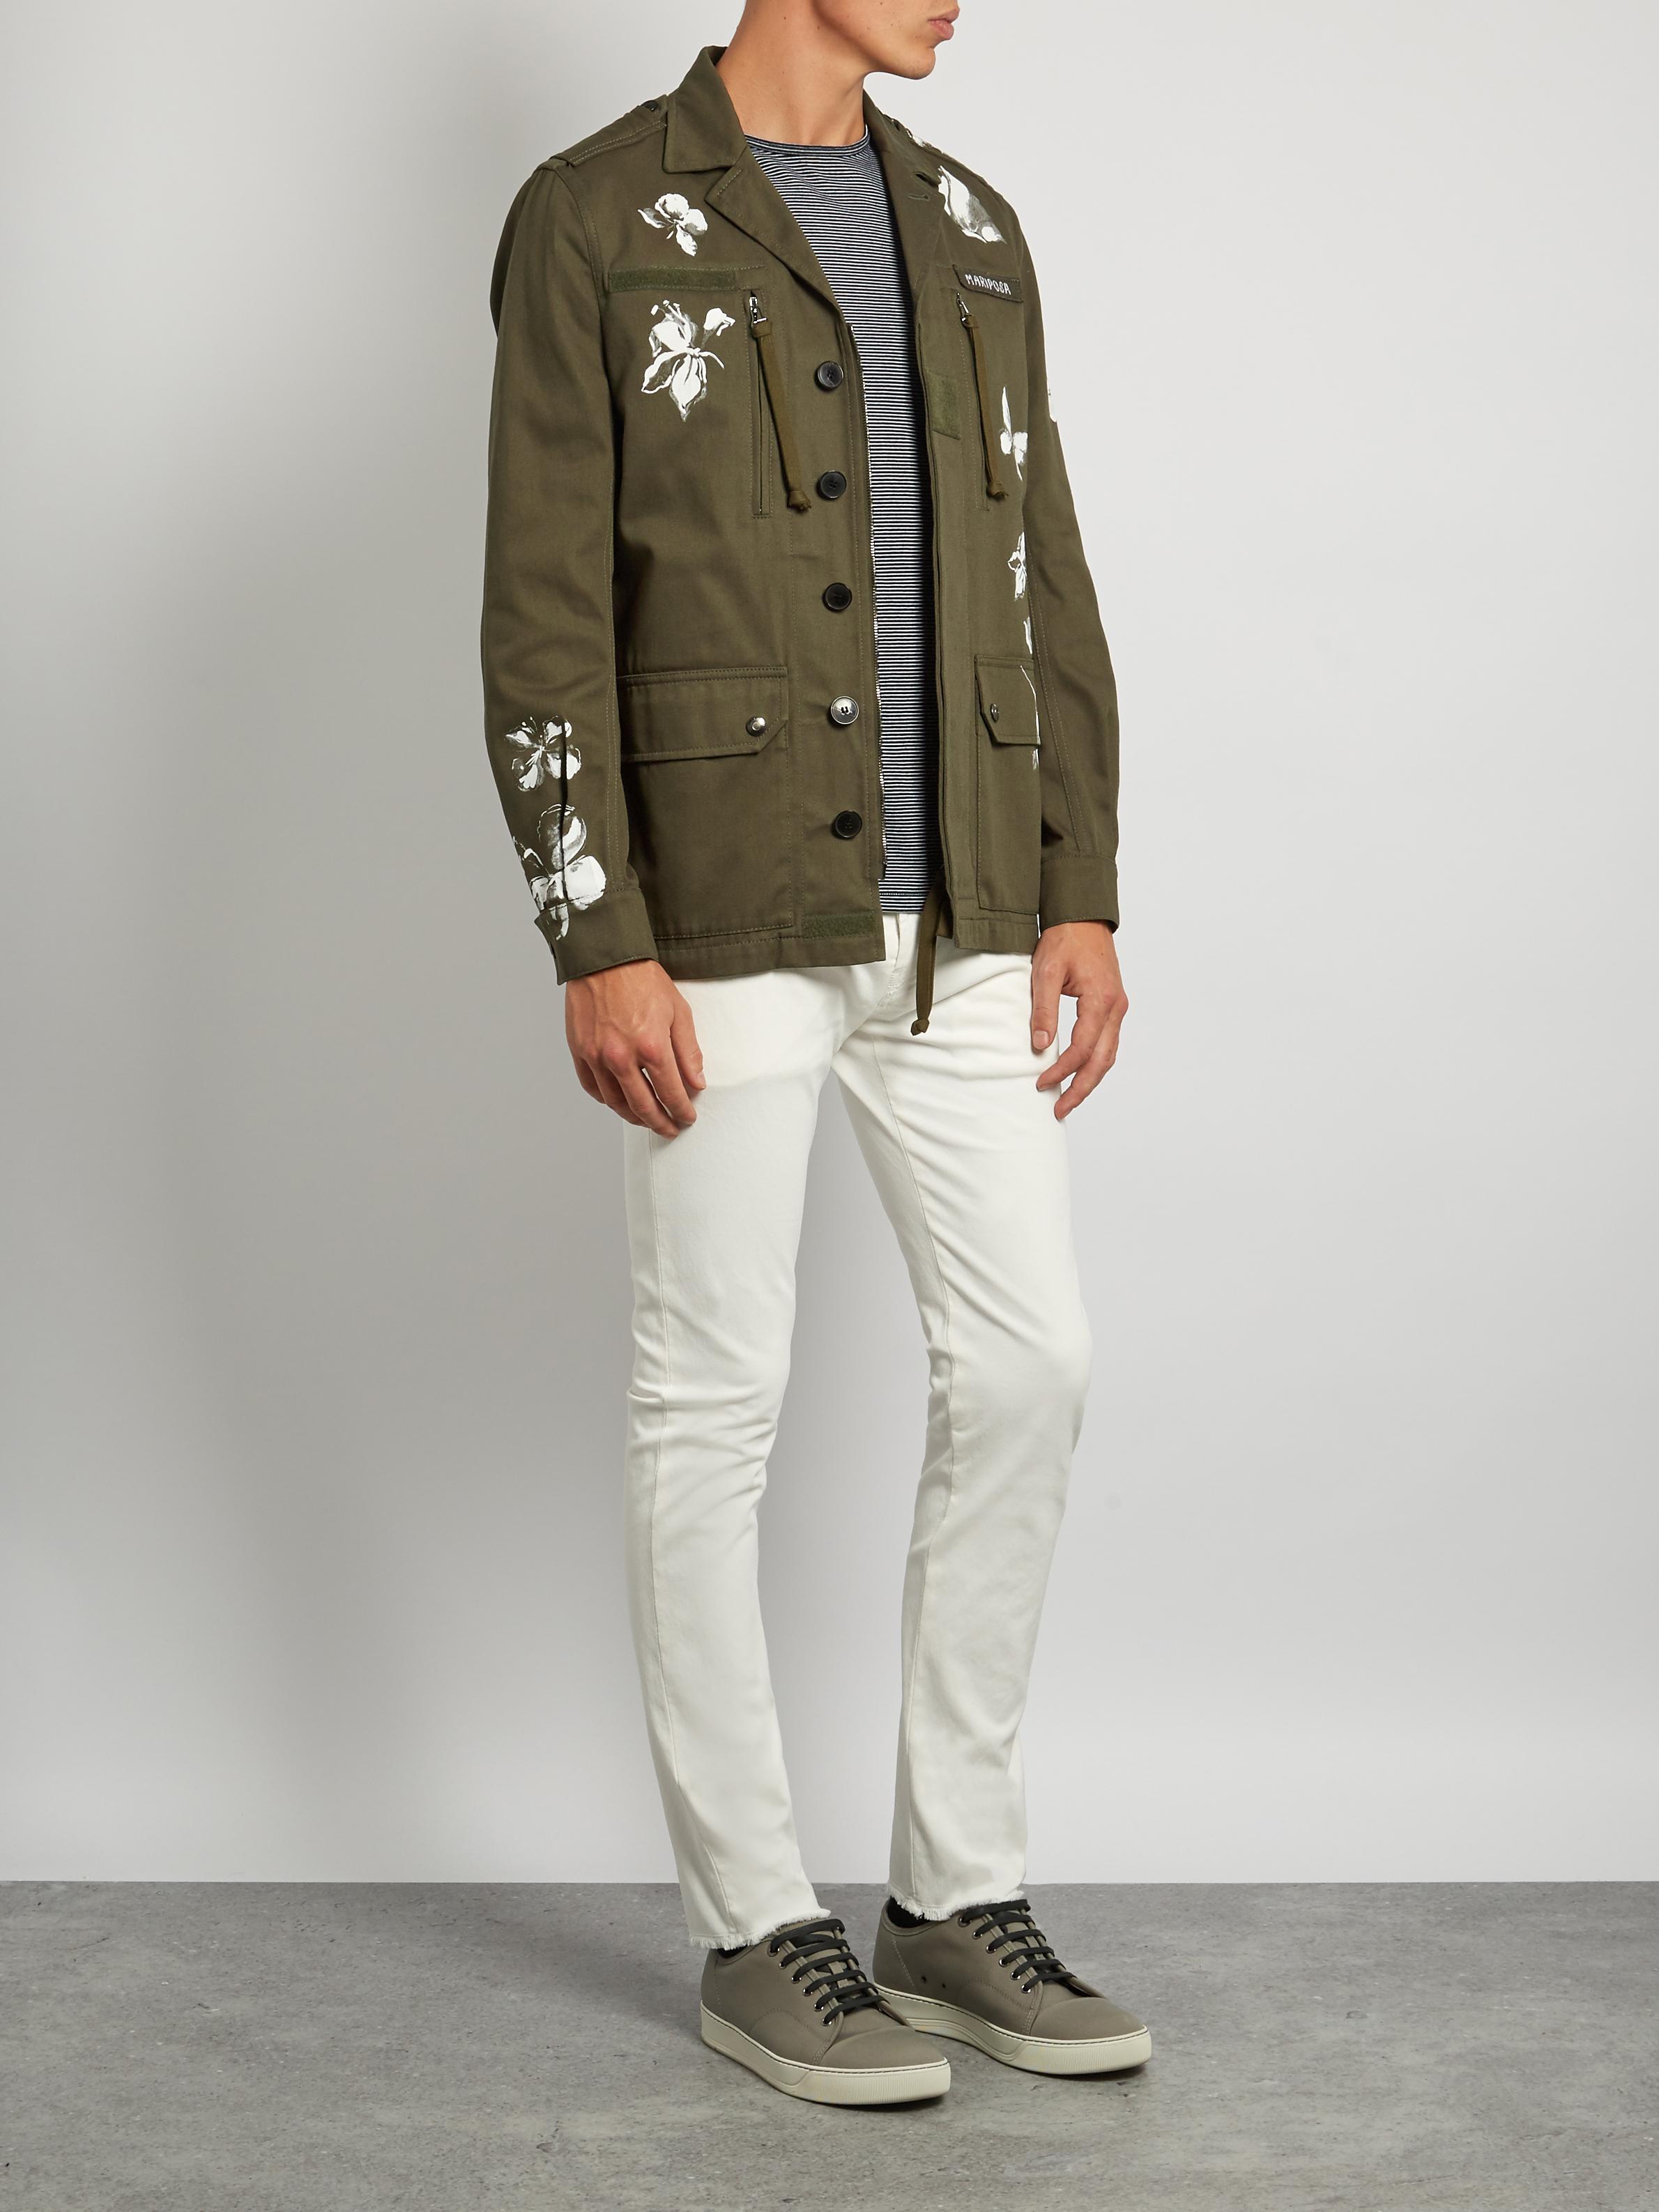 Valentino Mariposa Cotton Jacket in Green for Men | Lyst